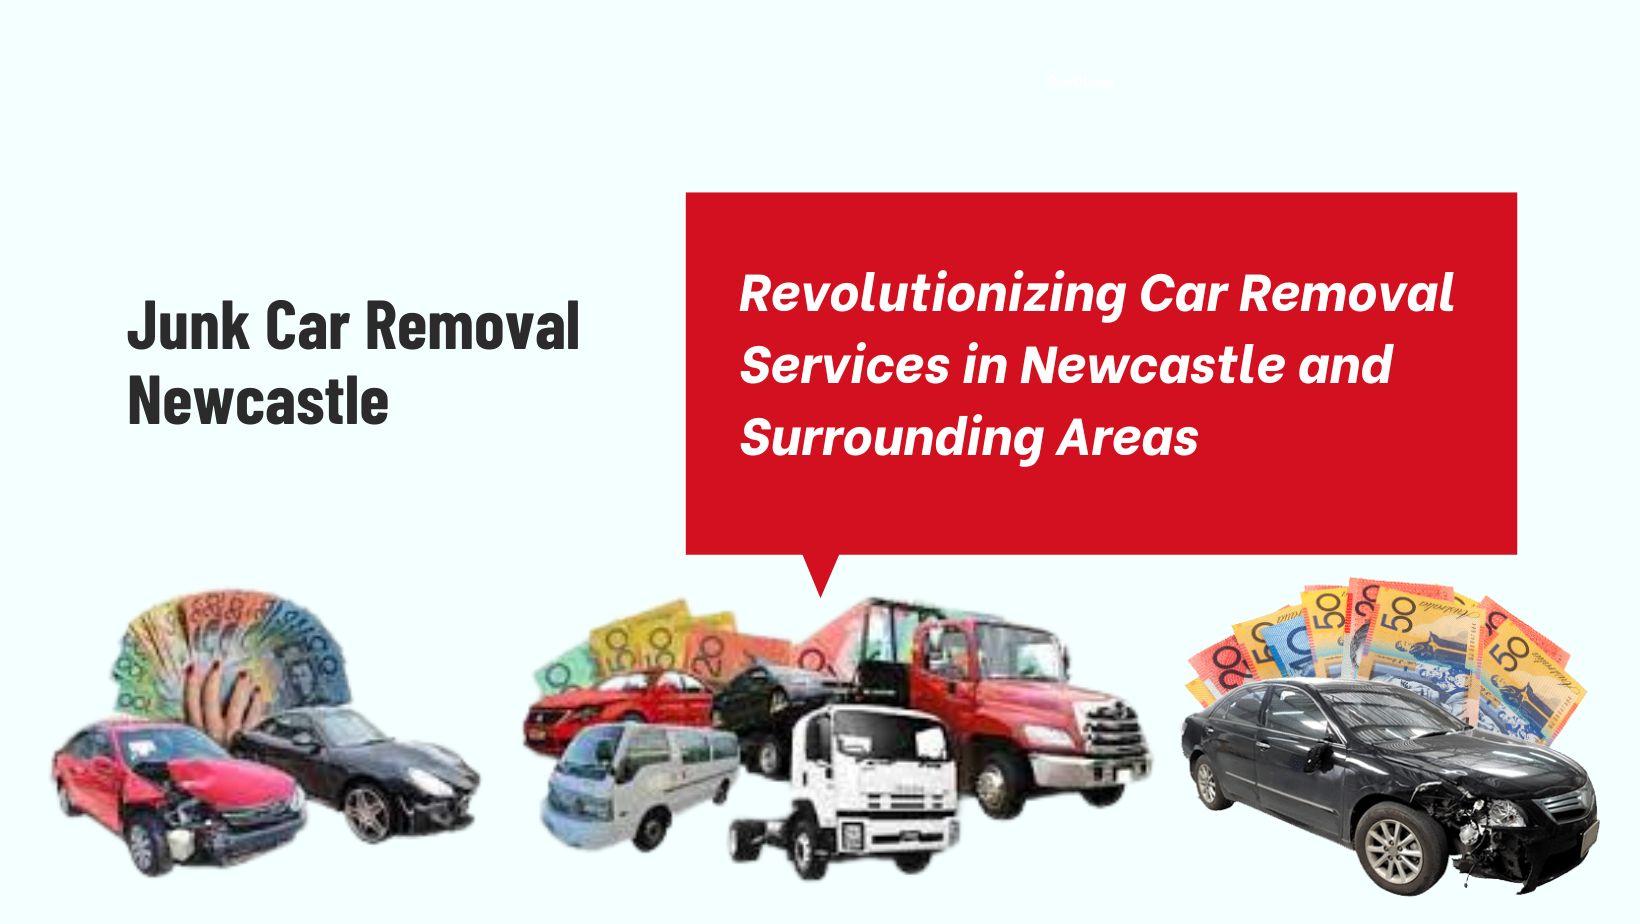 Revolutionizing Car Removal Services in Newcastle and Surrounding Areas